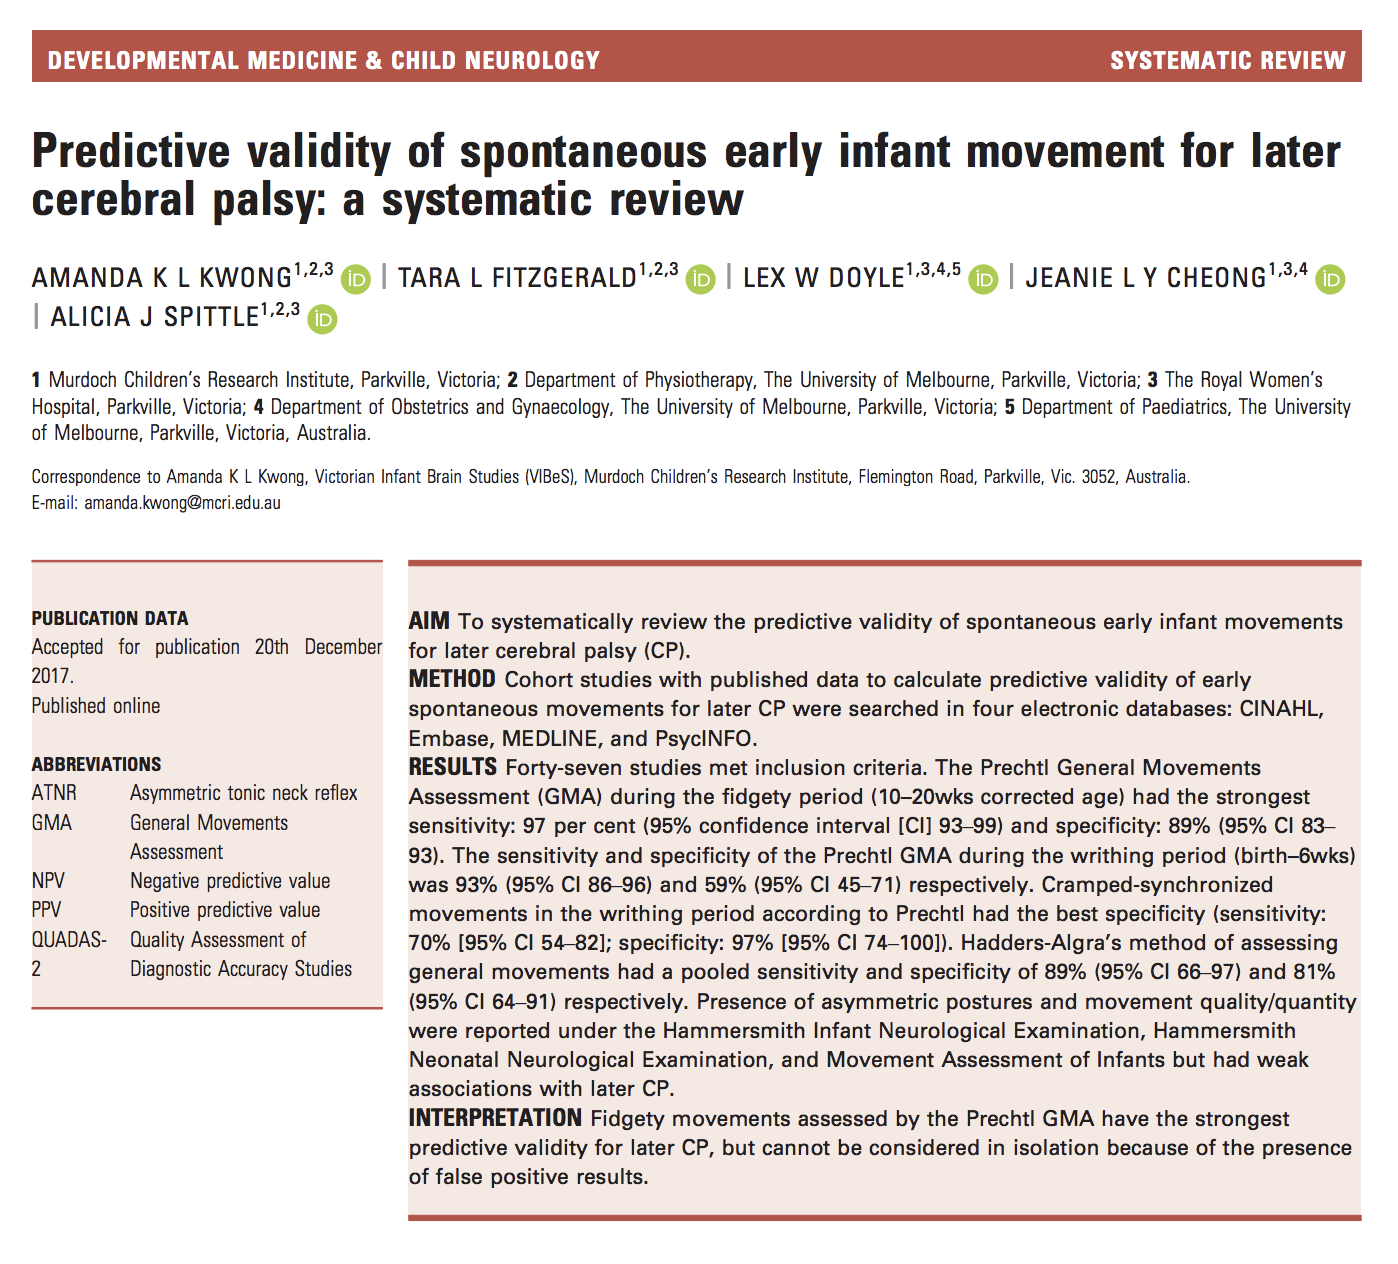 Predictive validity of spontaneous early infant movement for later cerebral palsy: a systematic review